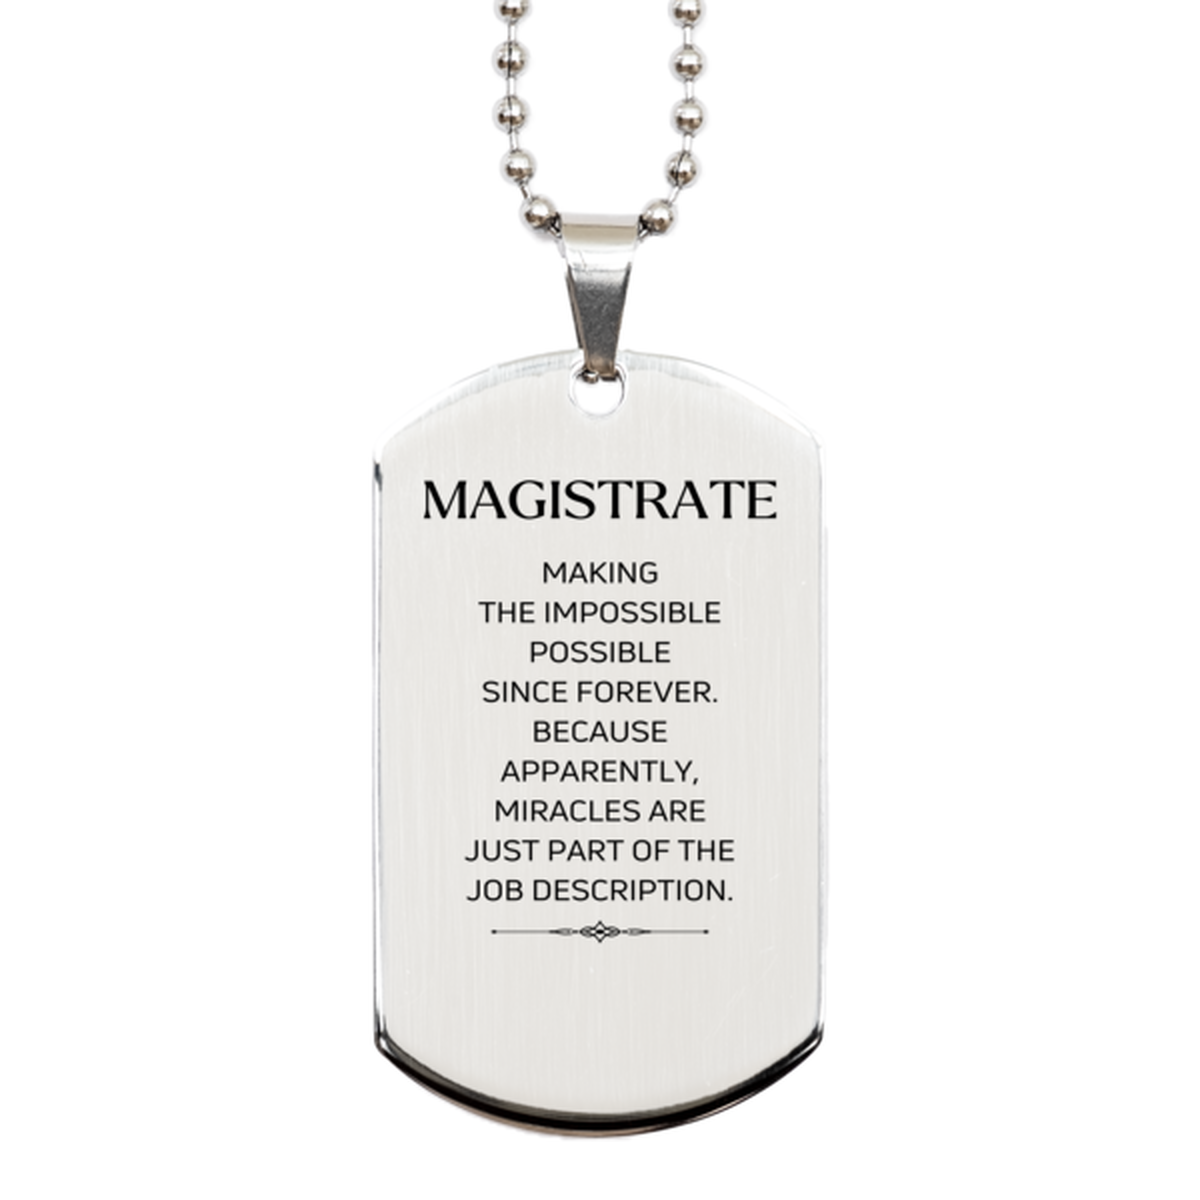 Funny Magistrate Gifts, Miracles are just part of the job description, Inspirational Birthday Silver Dog Tag For Magistrate, Men, Women, Coworkers, Friends, Boss